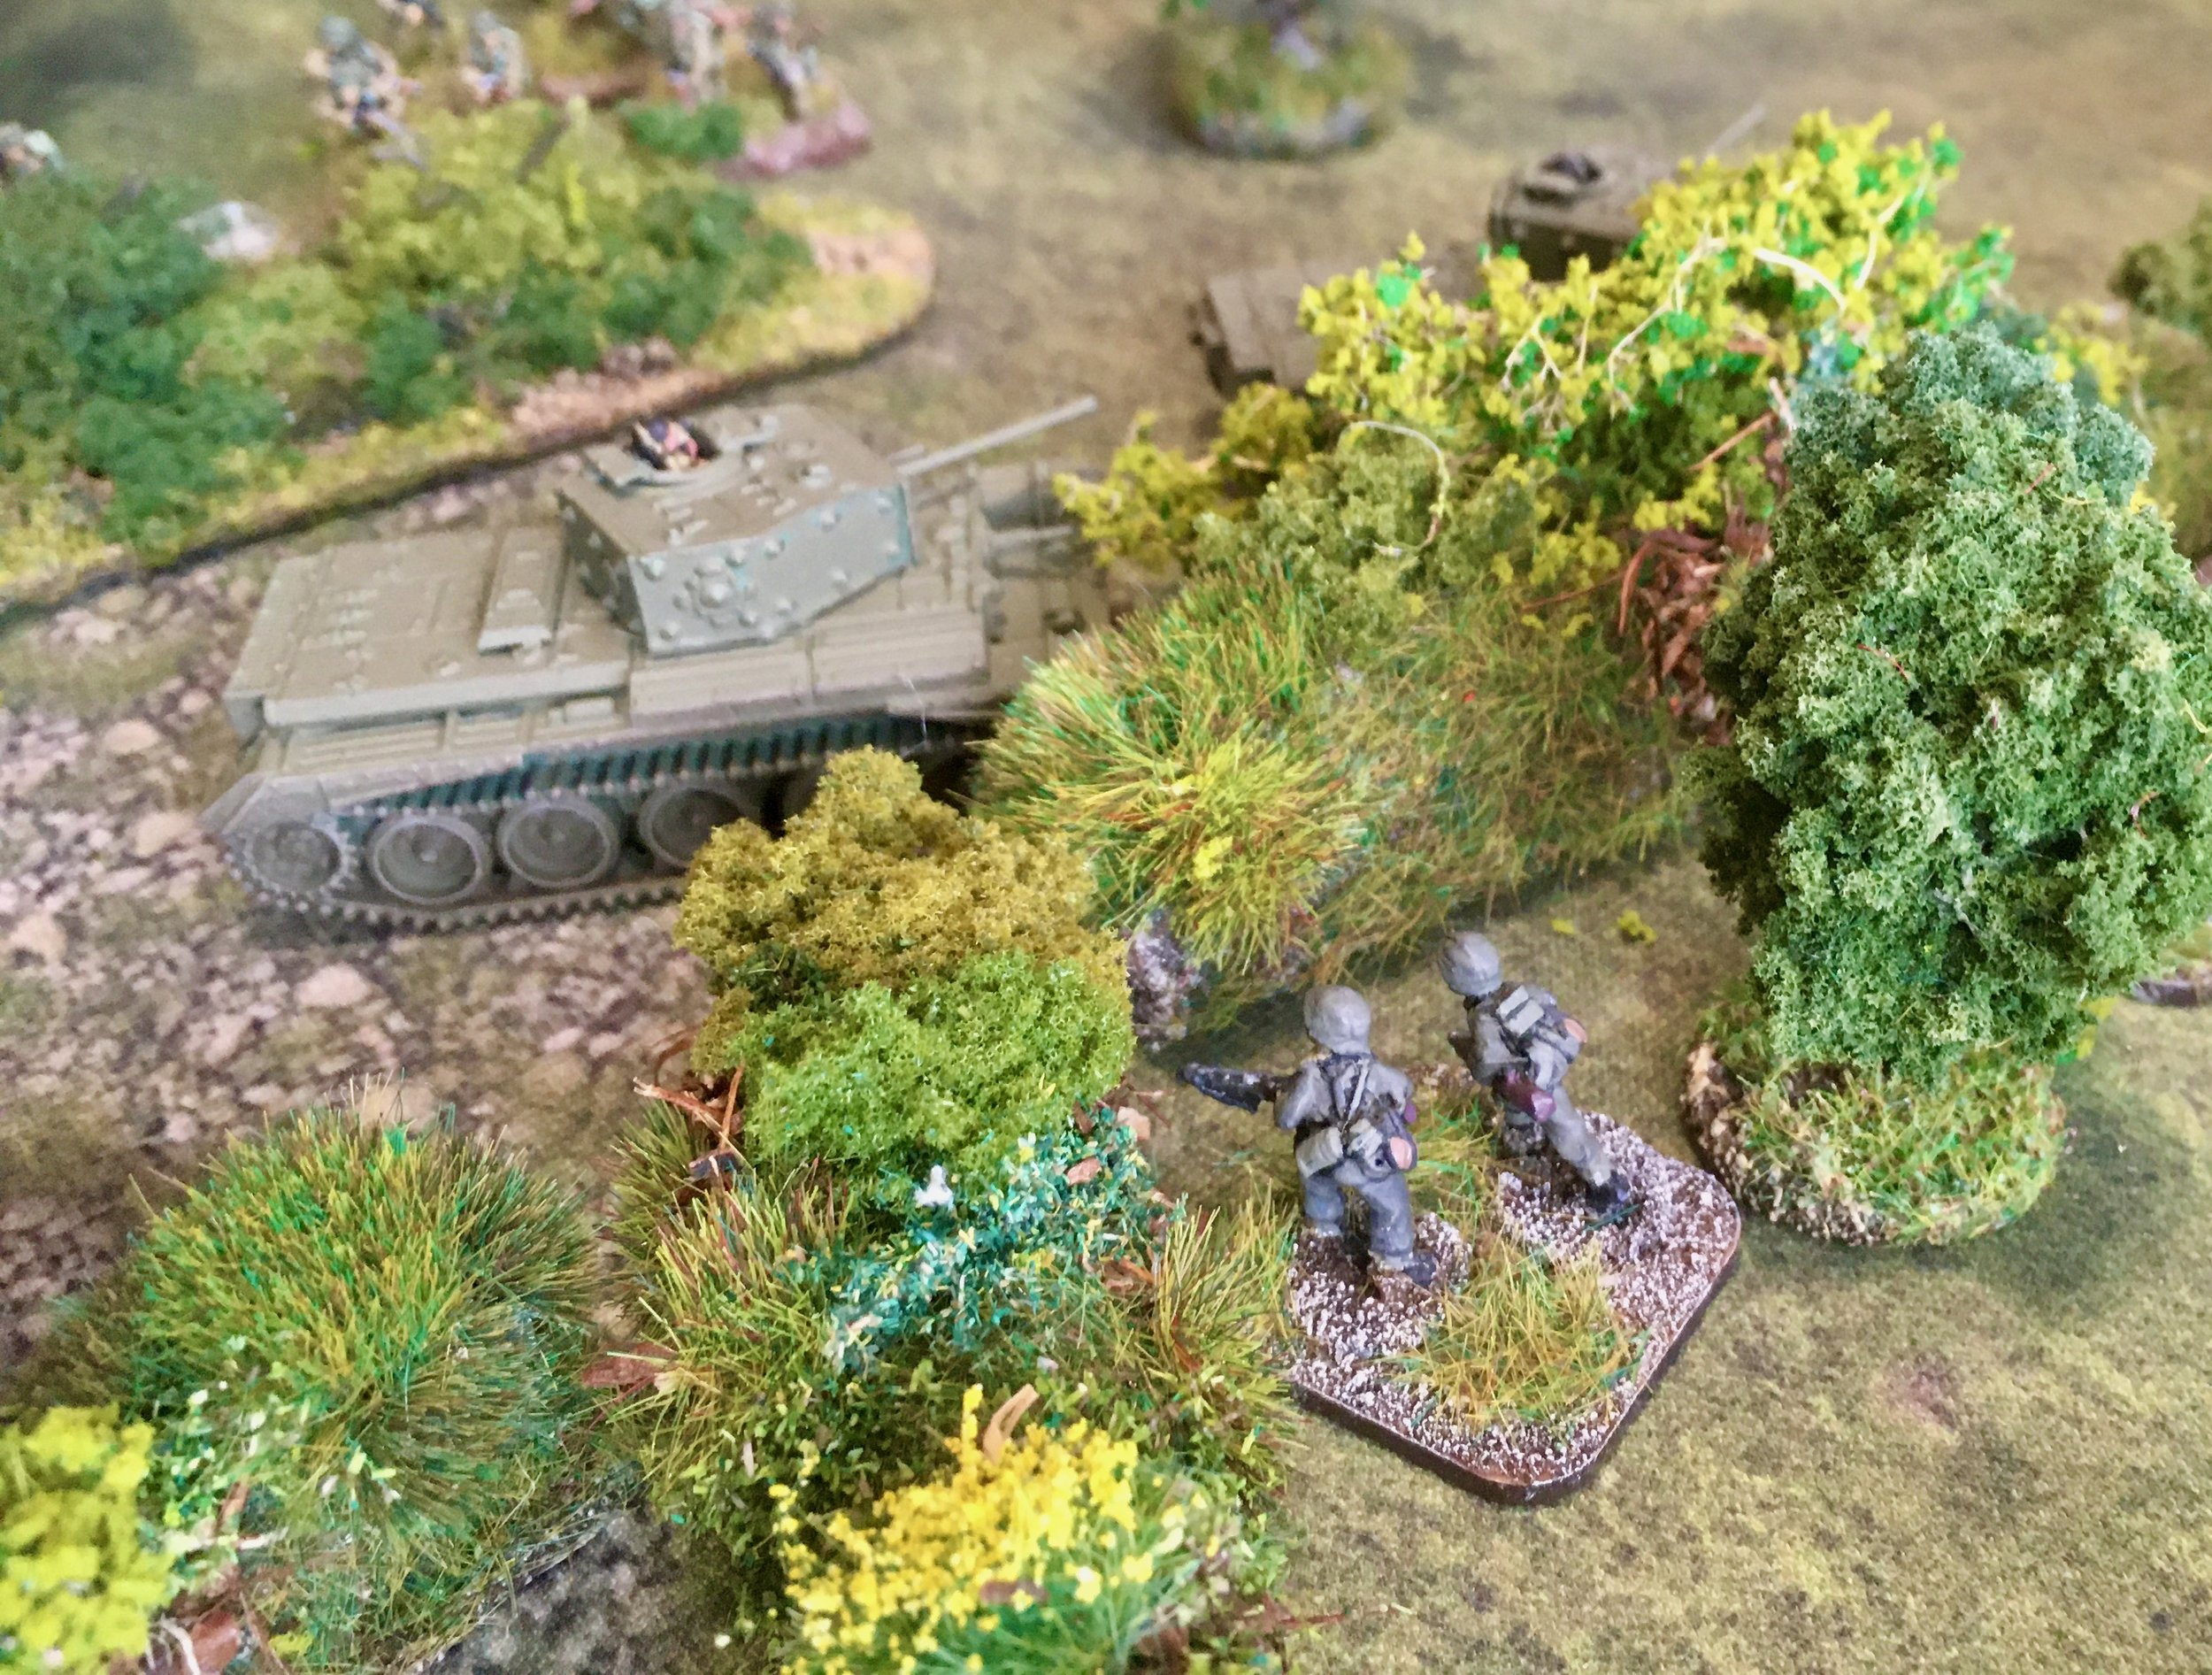 The German infantry attempted to grenade a Cromwell of 2 Troop but failed.